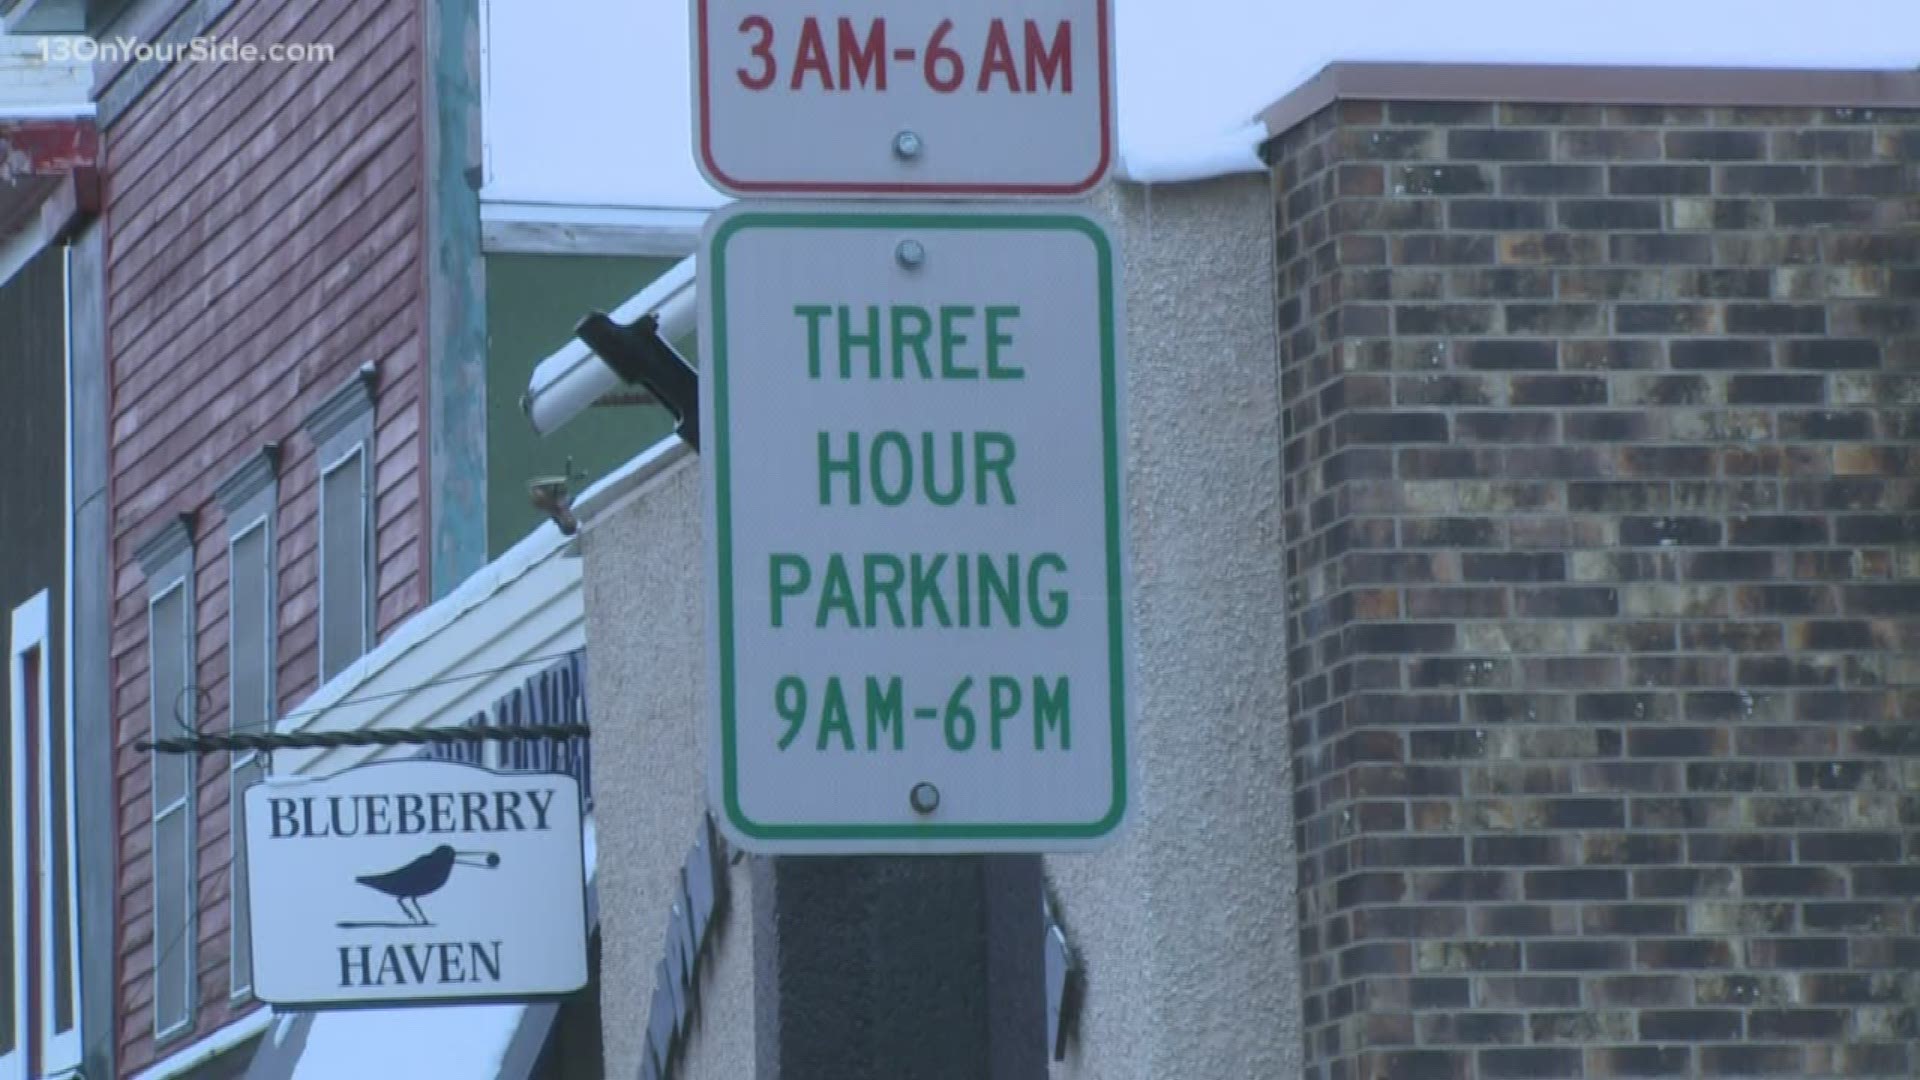 The idea is to move to a paid parking model for all of downtown Grand Haven and the waterfront between May and September. The fee would be $1 to $2 per hour.